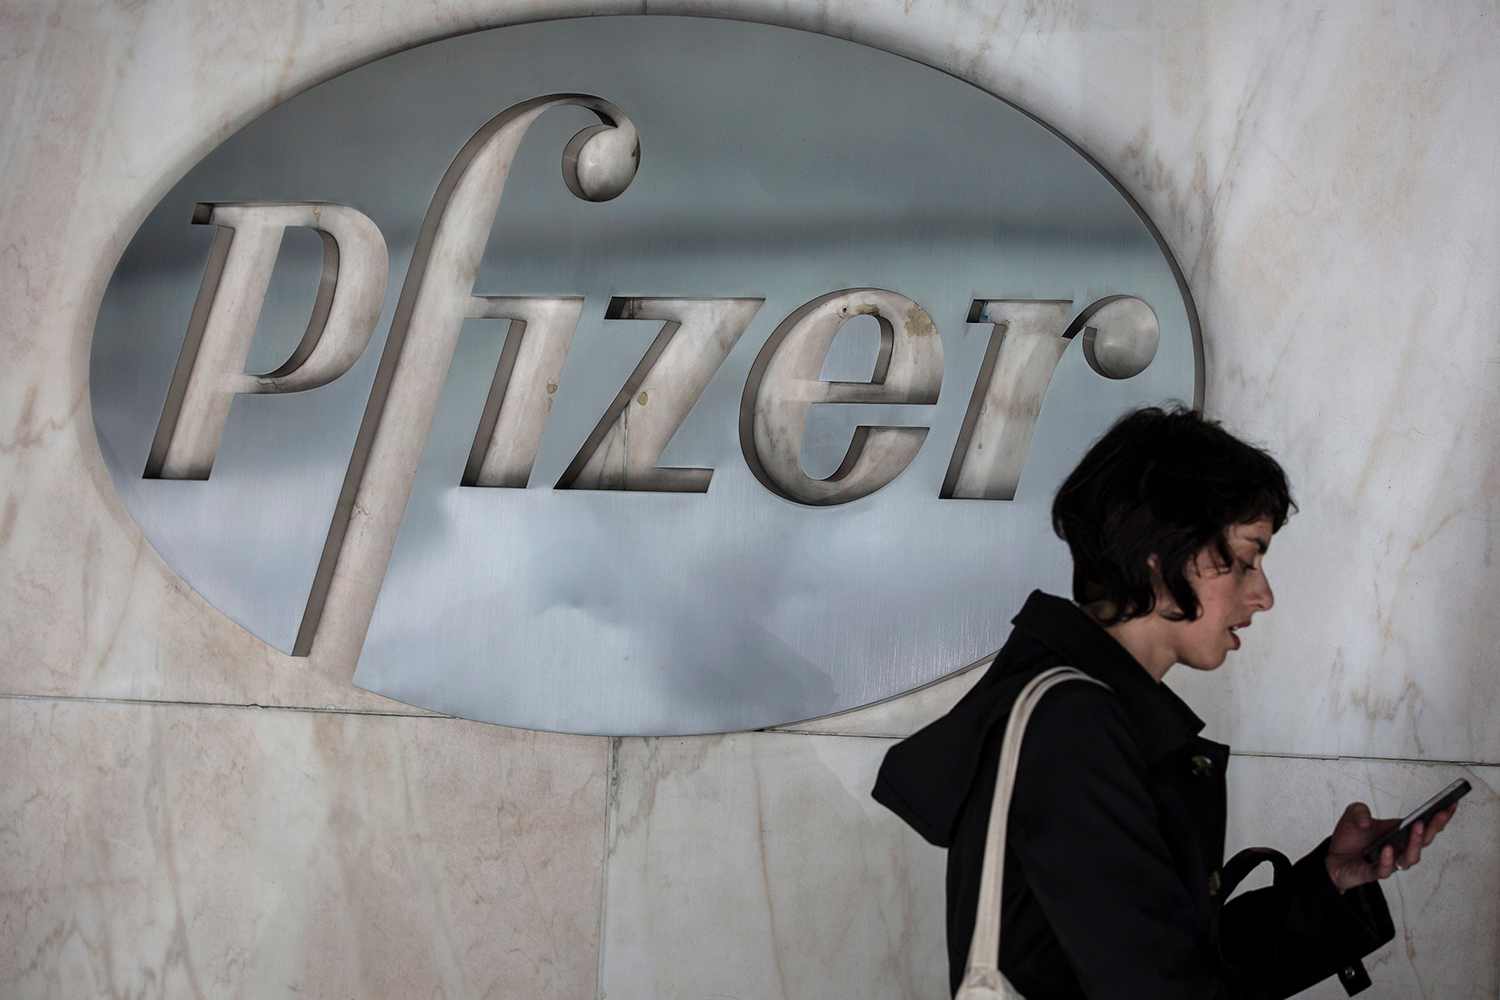 Pfizer confirms Allergan merger deal creating the world’s largest drug company